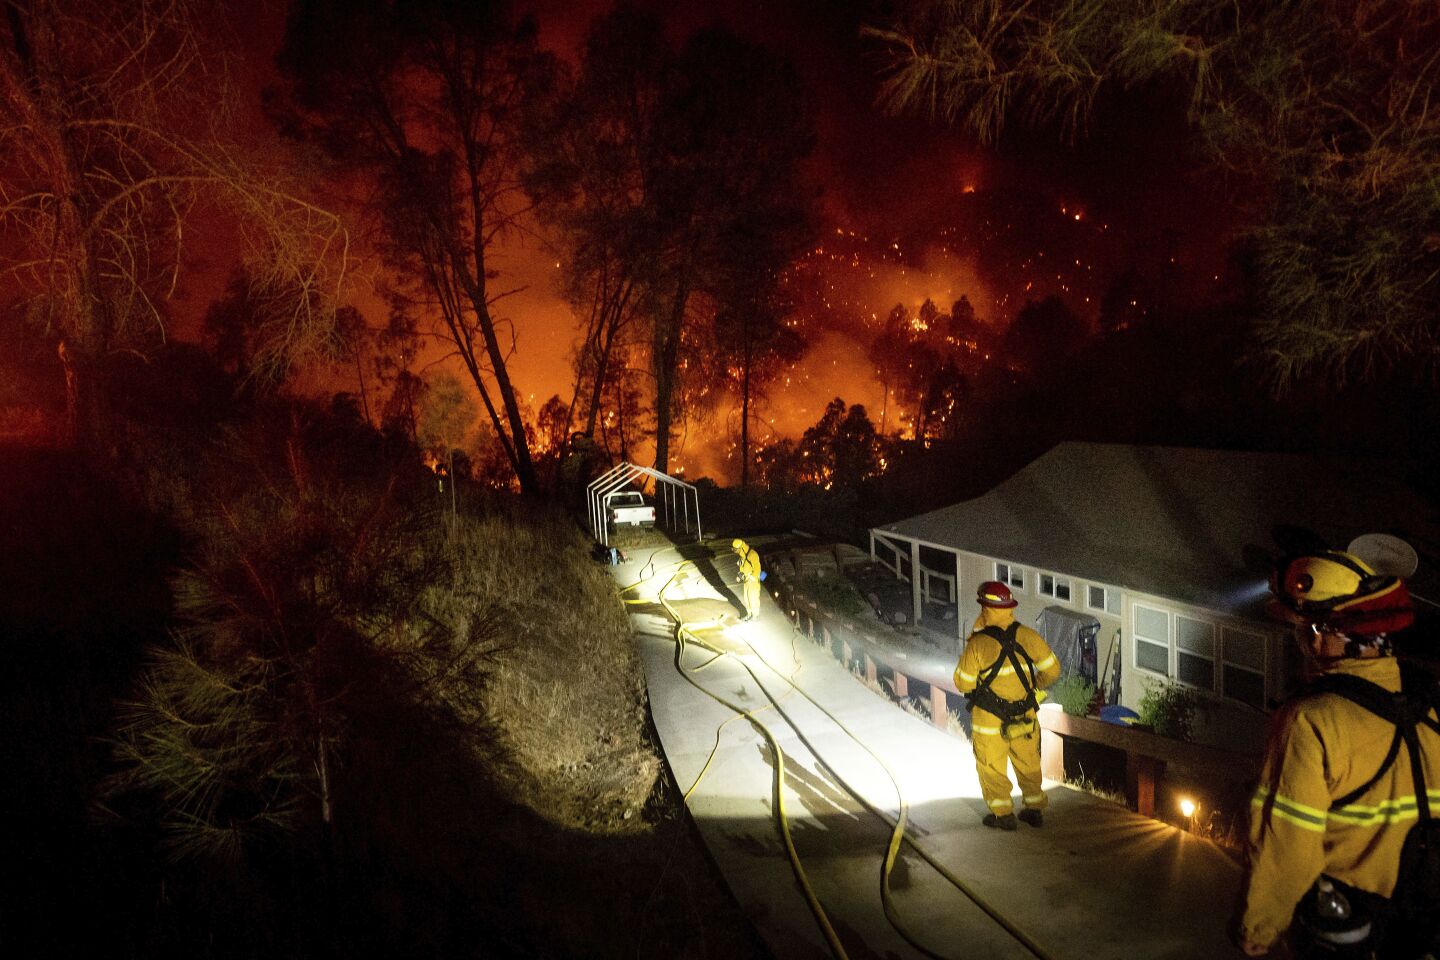 Firefighters protect a home in the Berryessa Estates neighborhood of unincorporated Napa County, Calif., as the LNU Lightning Complex fires burn on Friday. The blaze forced thousands to flee and destroyed hundreds of homes and other structures.